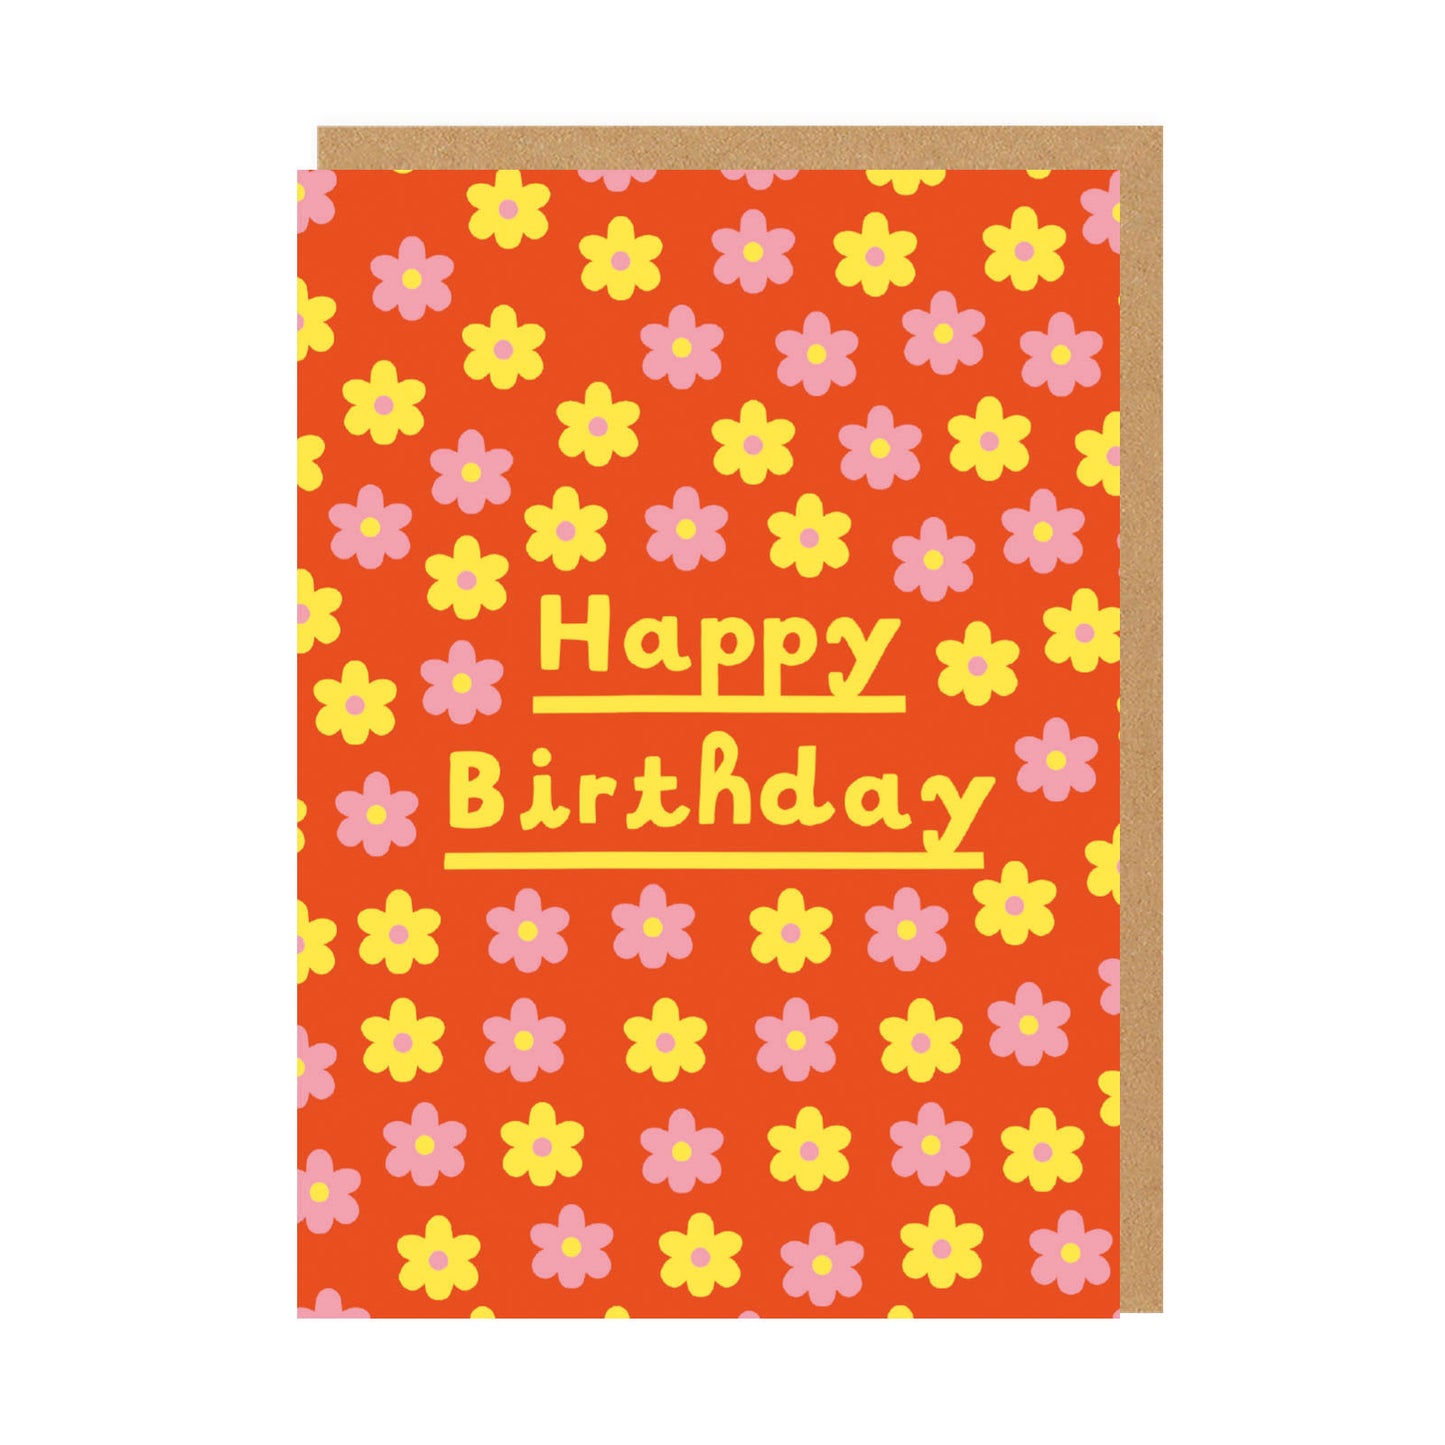 Birthday card with a red background and pink and yellow daisies